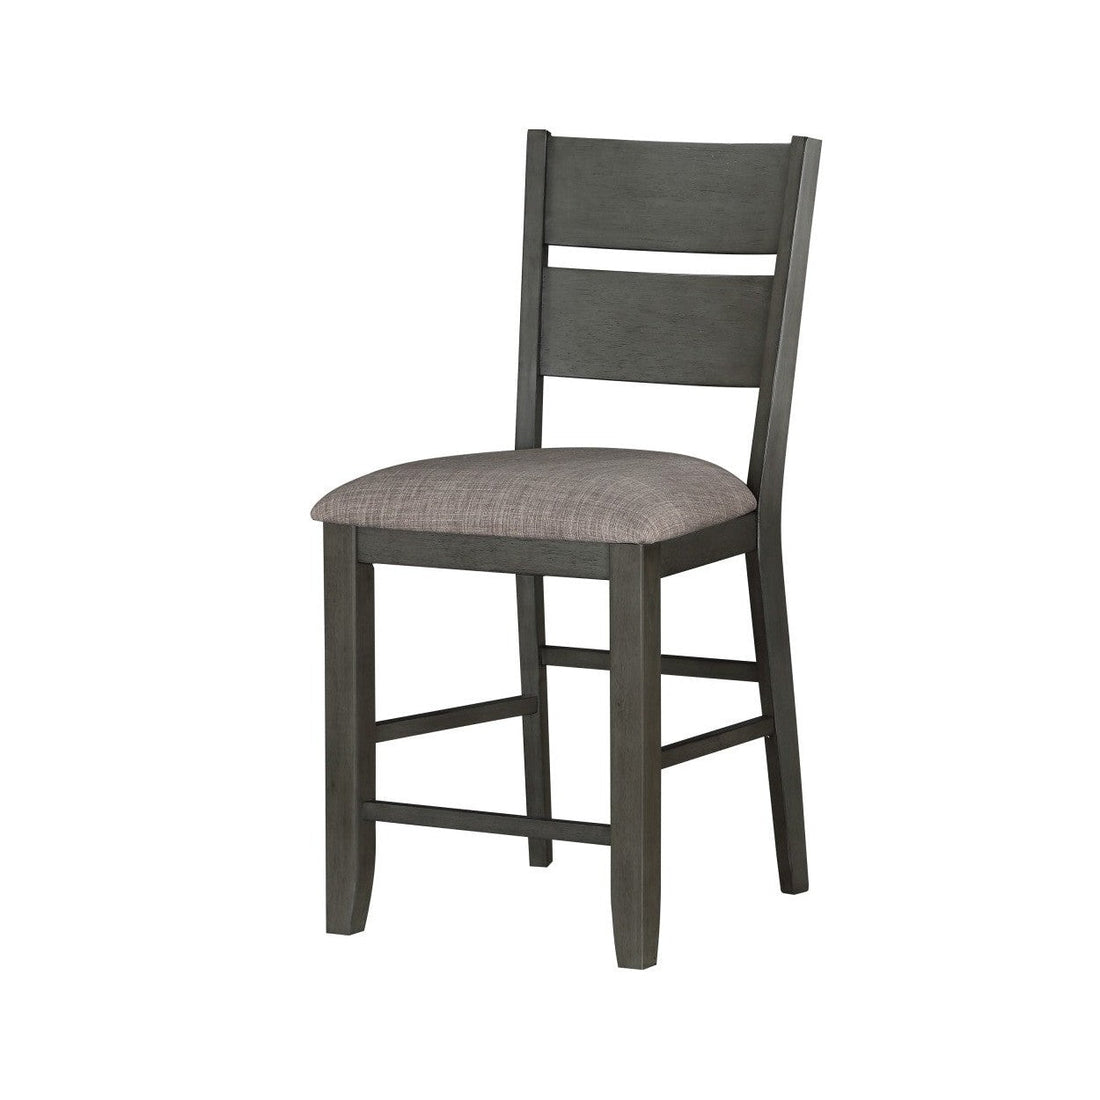 Counter Height Chair, Ladder Back 5674-24